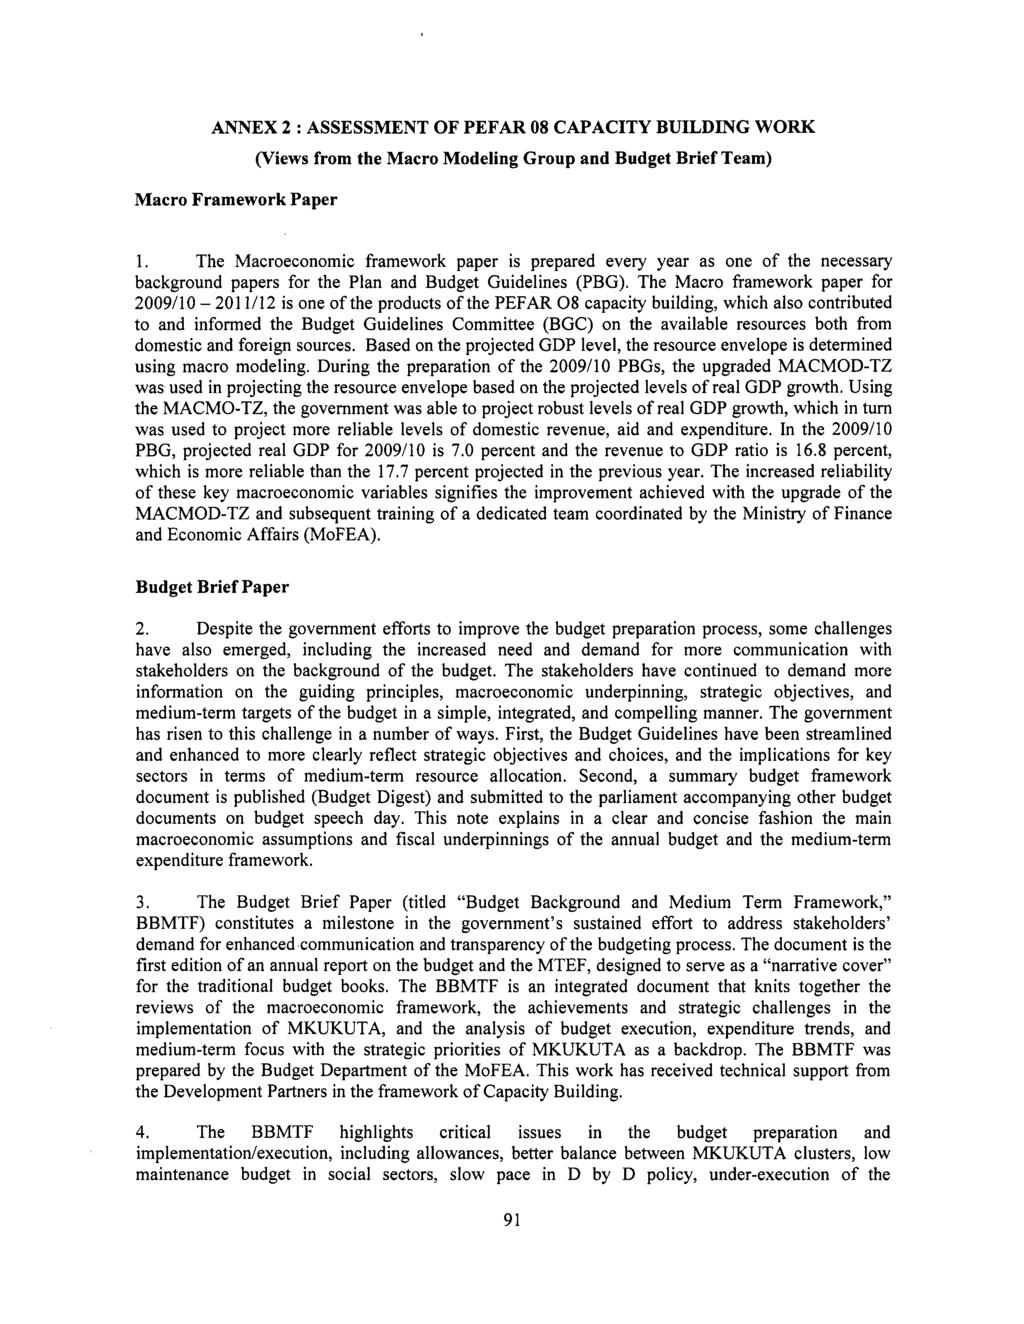 ANNEX 2 : ASSESSMENT OF PEFAR 08 CAPACITY BUILDING WORK Macro Framework Paper (Views from the Macro Modeling Group and Budget Brief Team) 1.